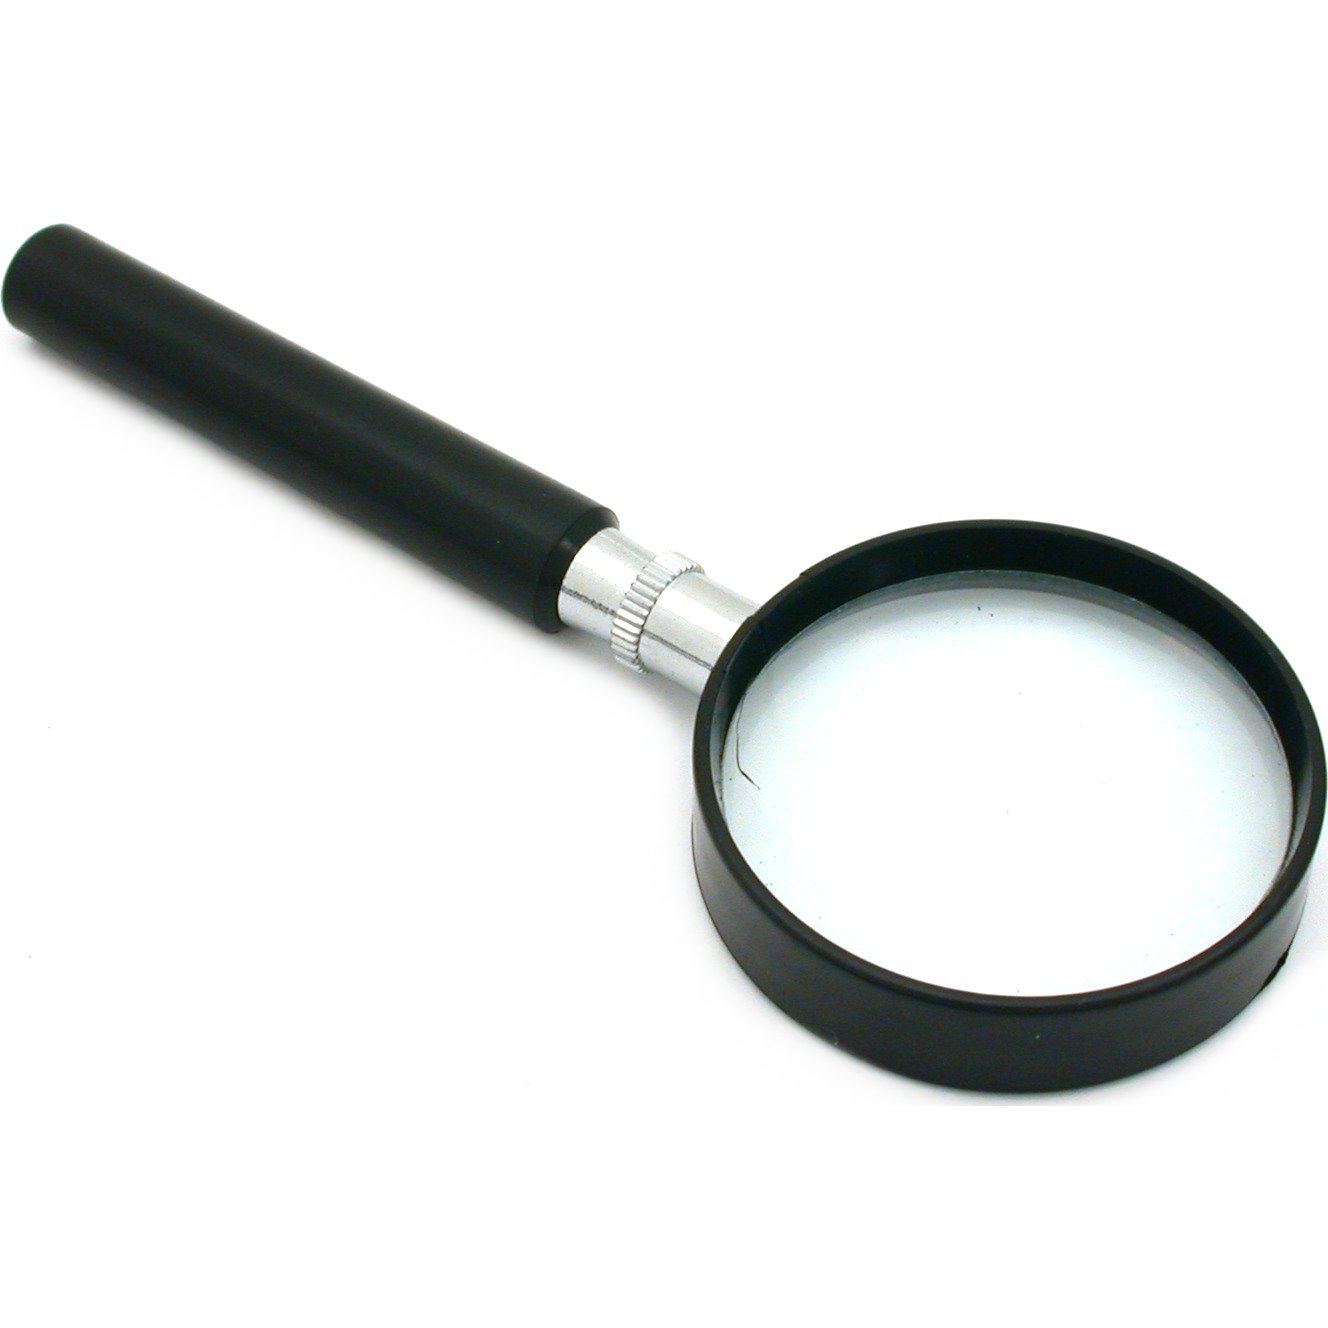 3X Magnifying Glass for Stamps and Coins Reading Jewelers Inspection Tool 5